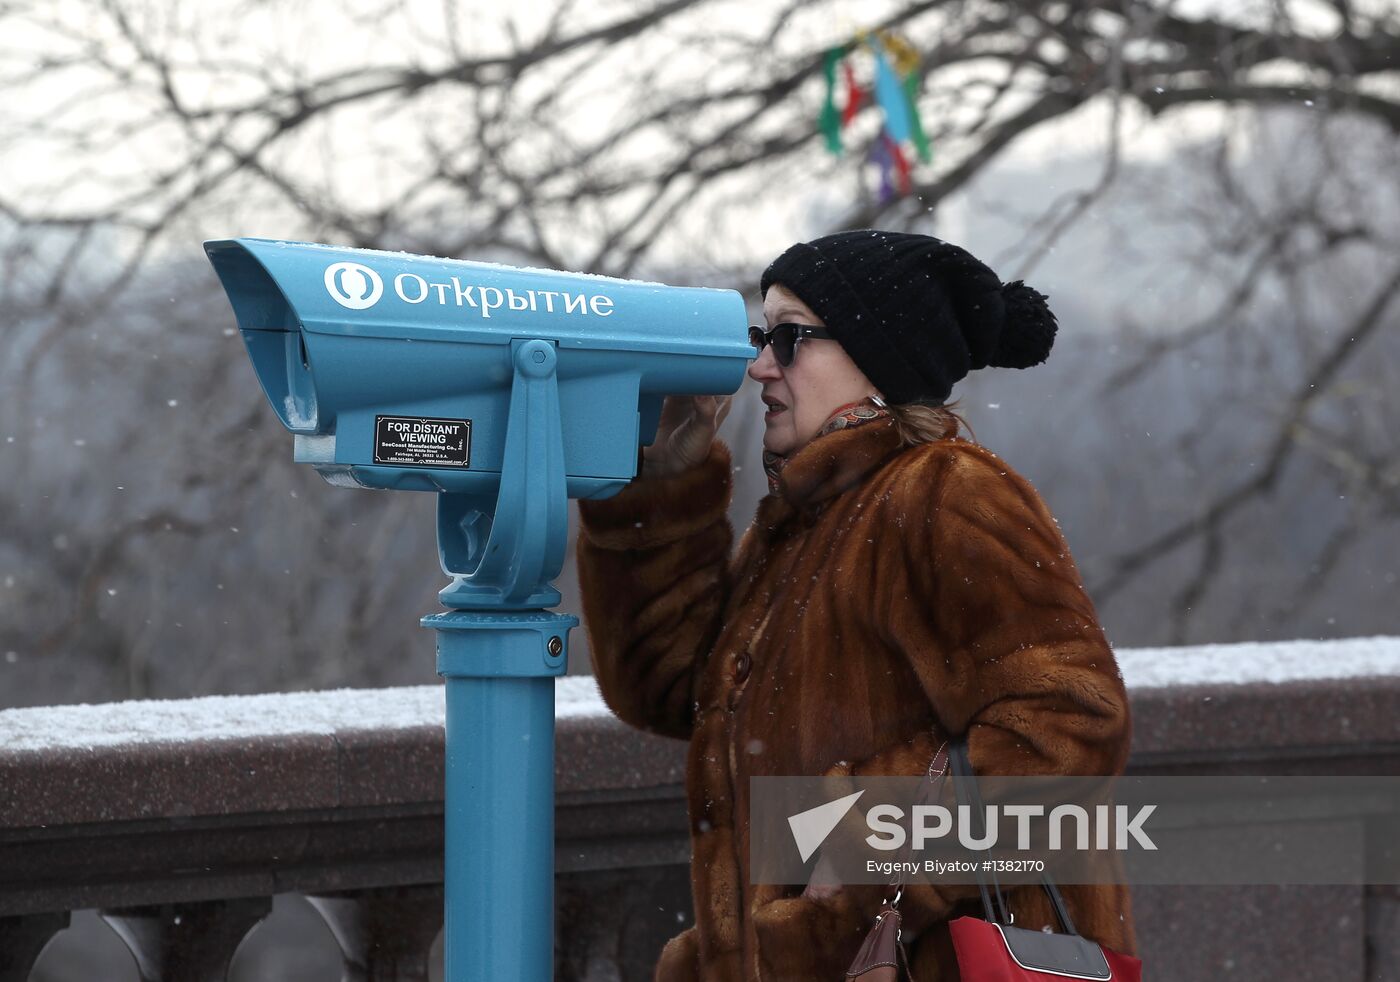 Stationary binoculars installed on Moscow's Sparrow Hills